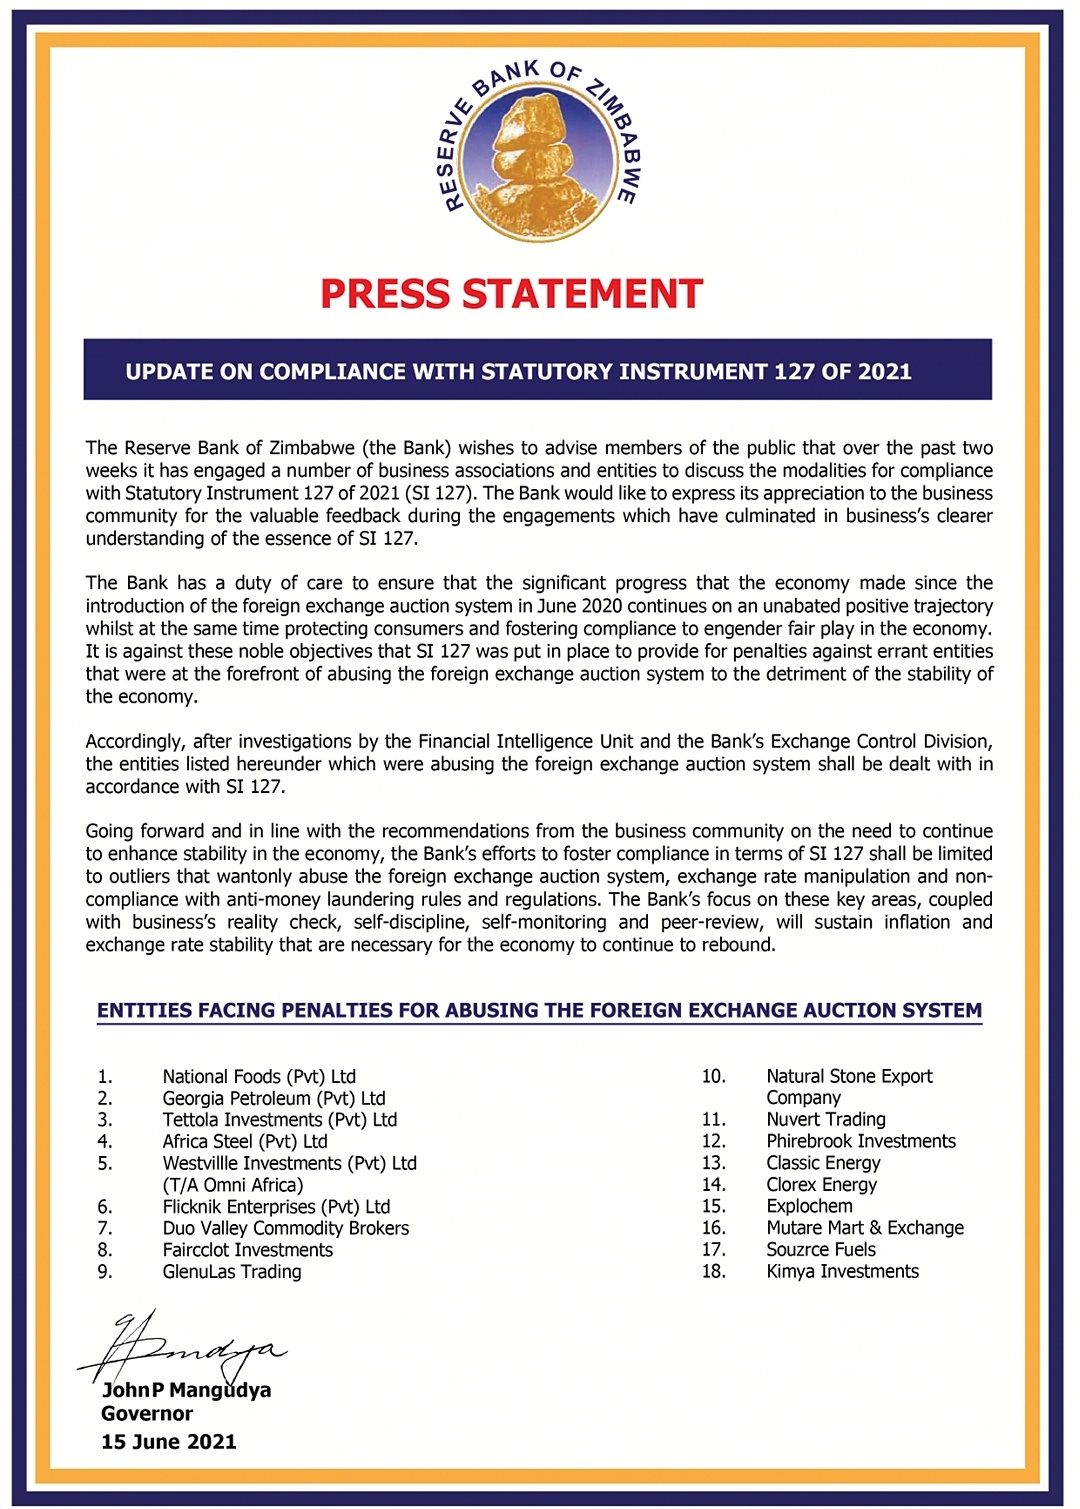 RBZ Names & Shames 18 Companies That "Abused" Foreign Exchange Auction System